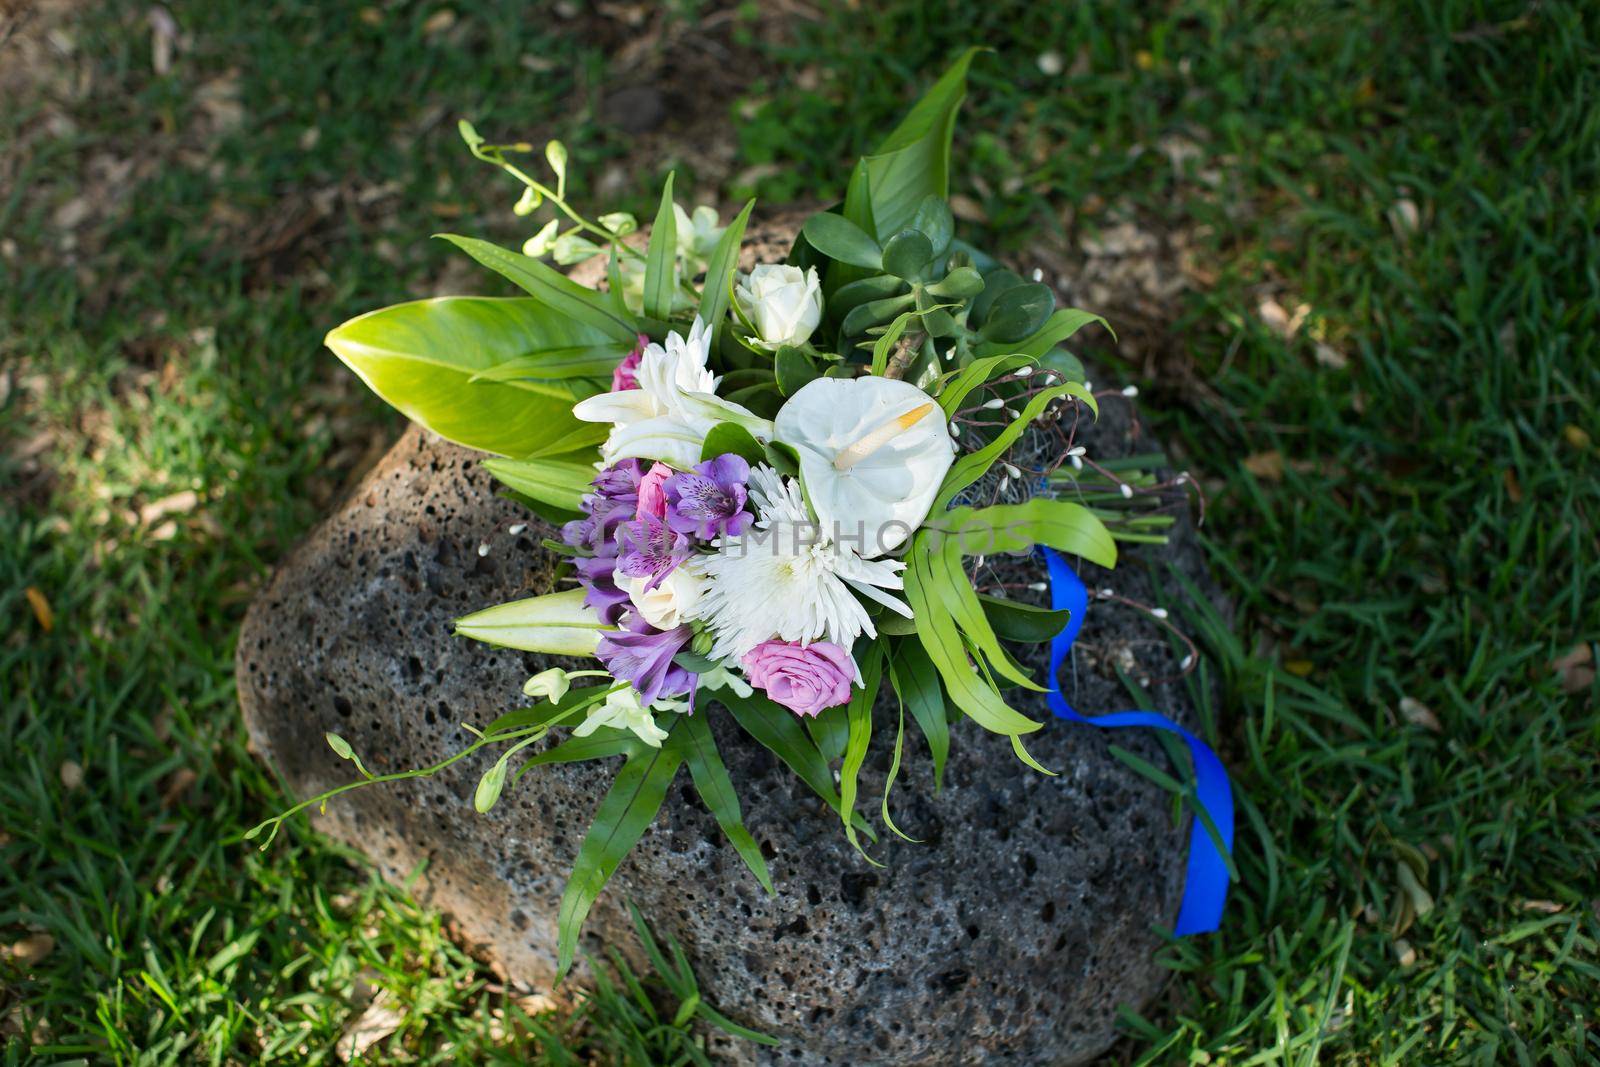 A beautiful wedding bouquet on a stone in the park.